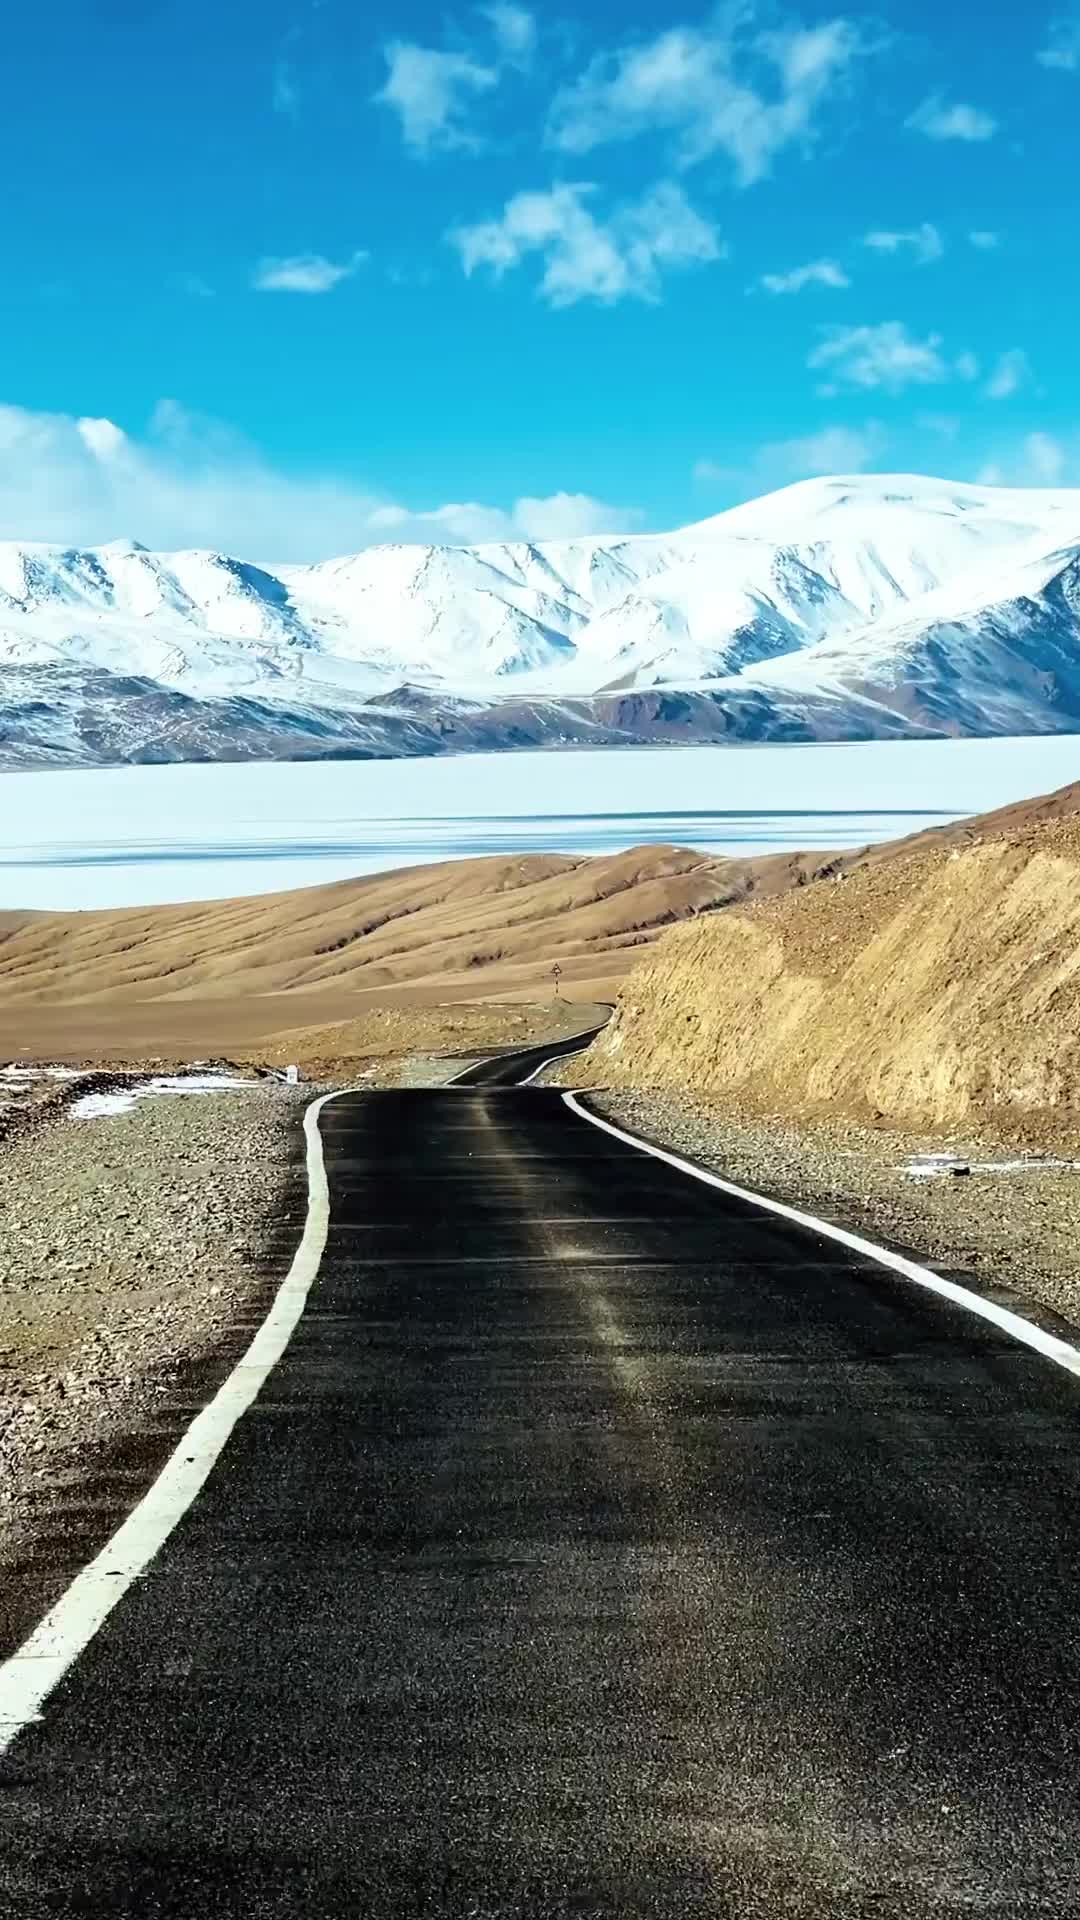 Most Surreal Road in Leh: Winter & Summer Beauty